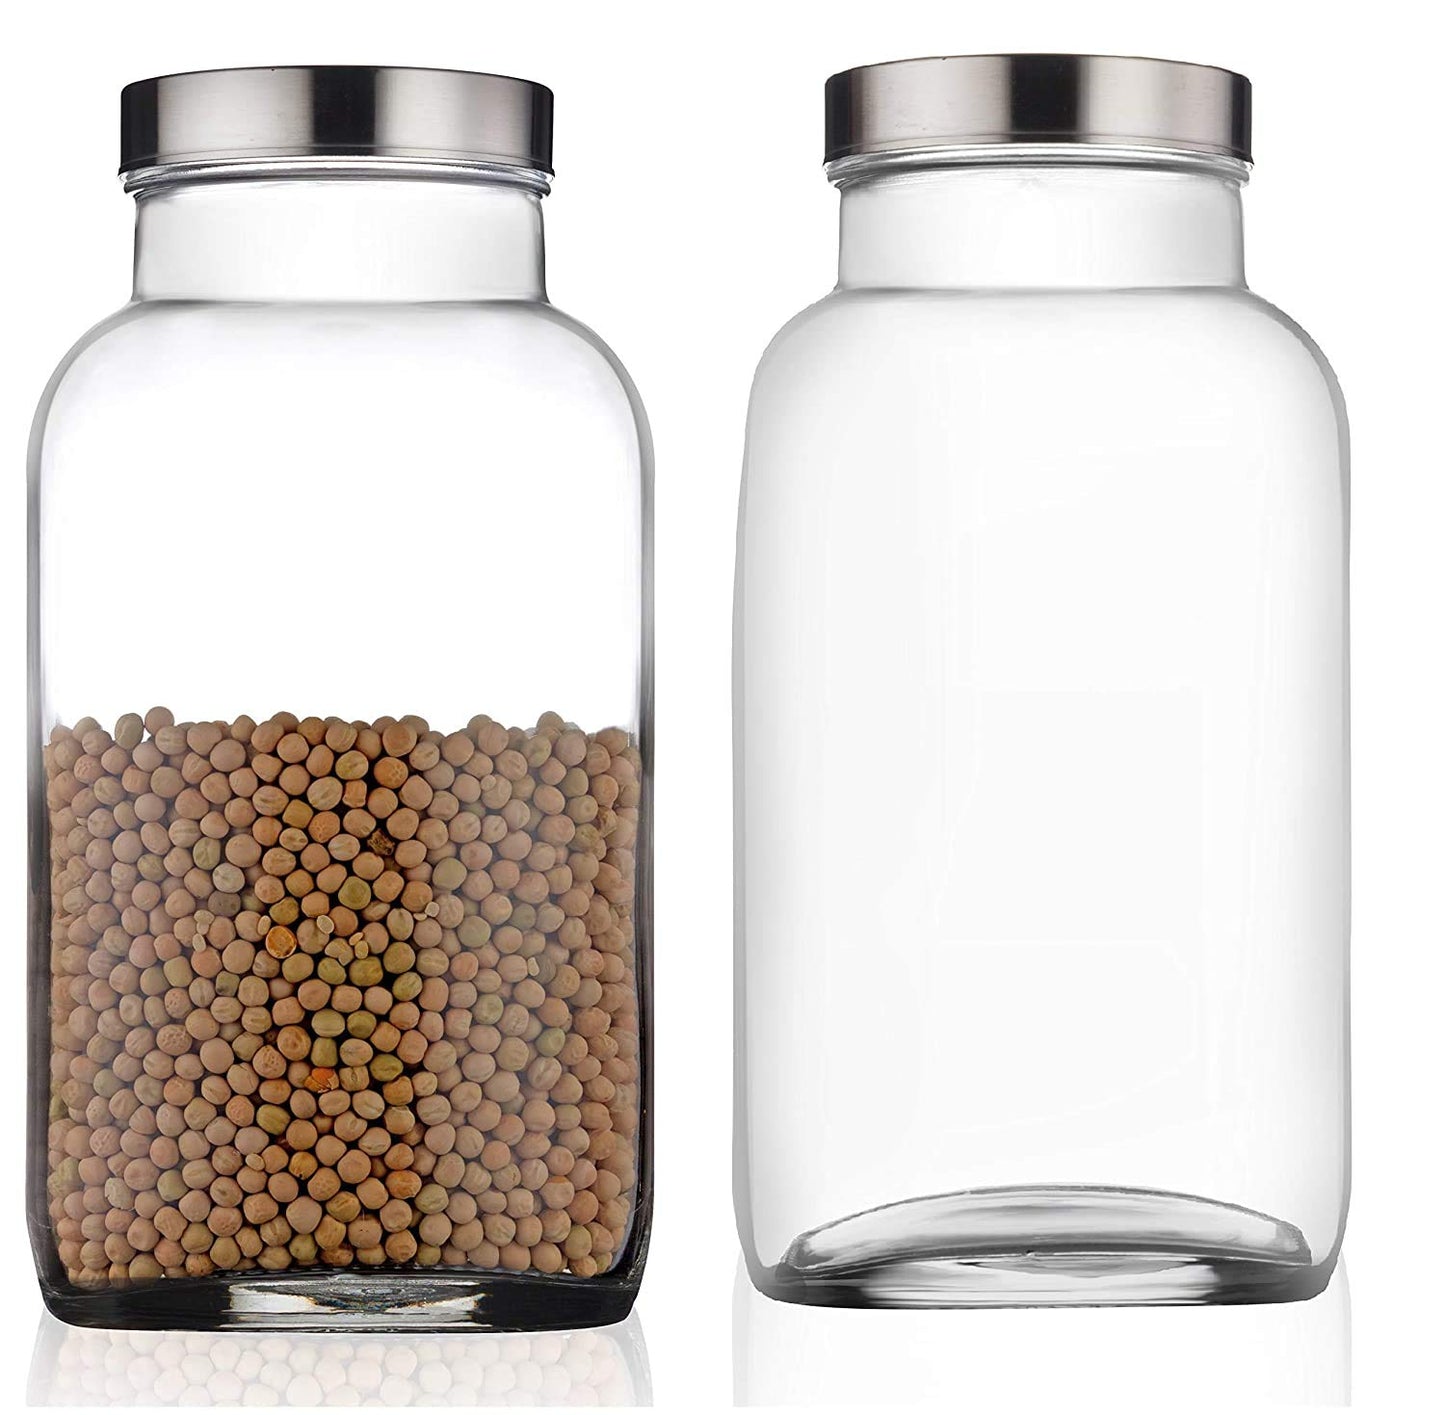 MACHAK Square Big Glass Containers for Kitchen Storage Food Storage Jar, See Through Steel Cap, 3000ml, Clear